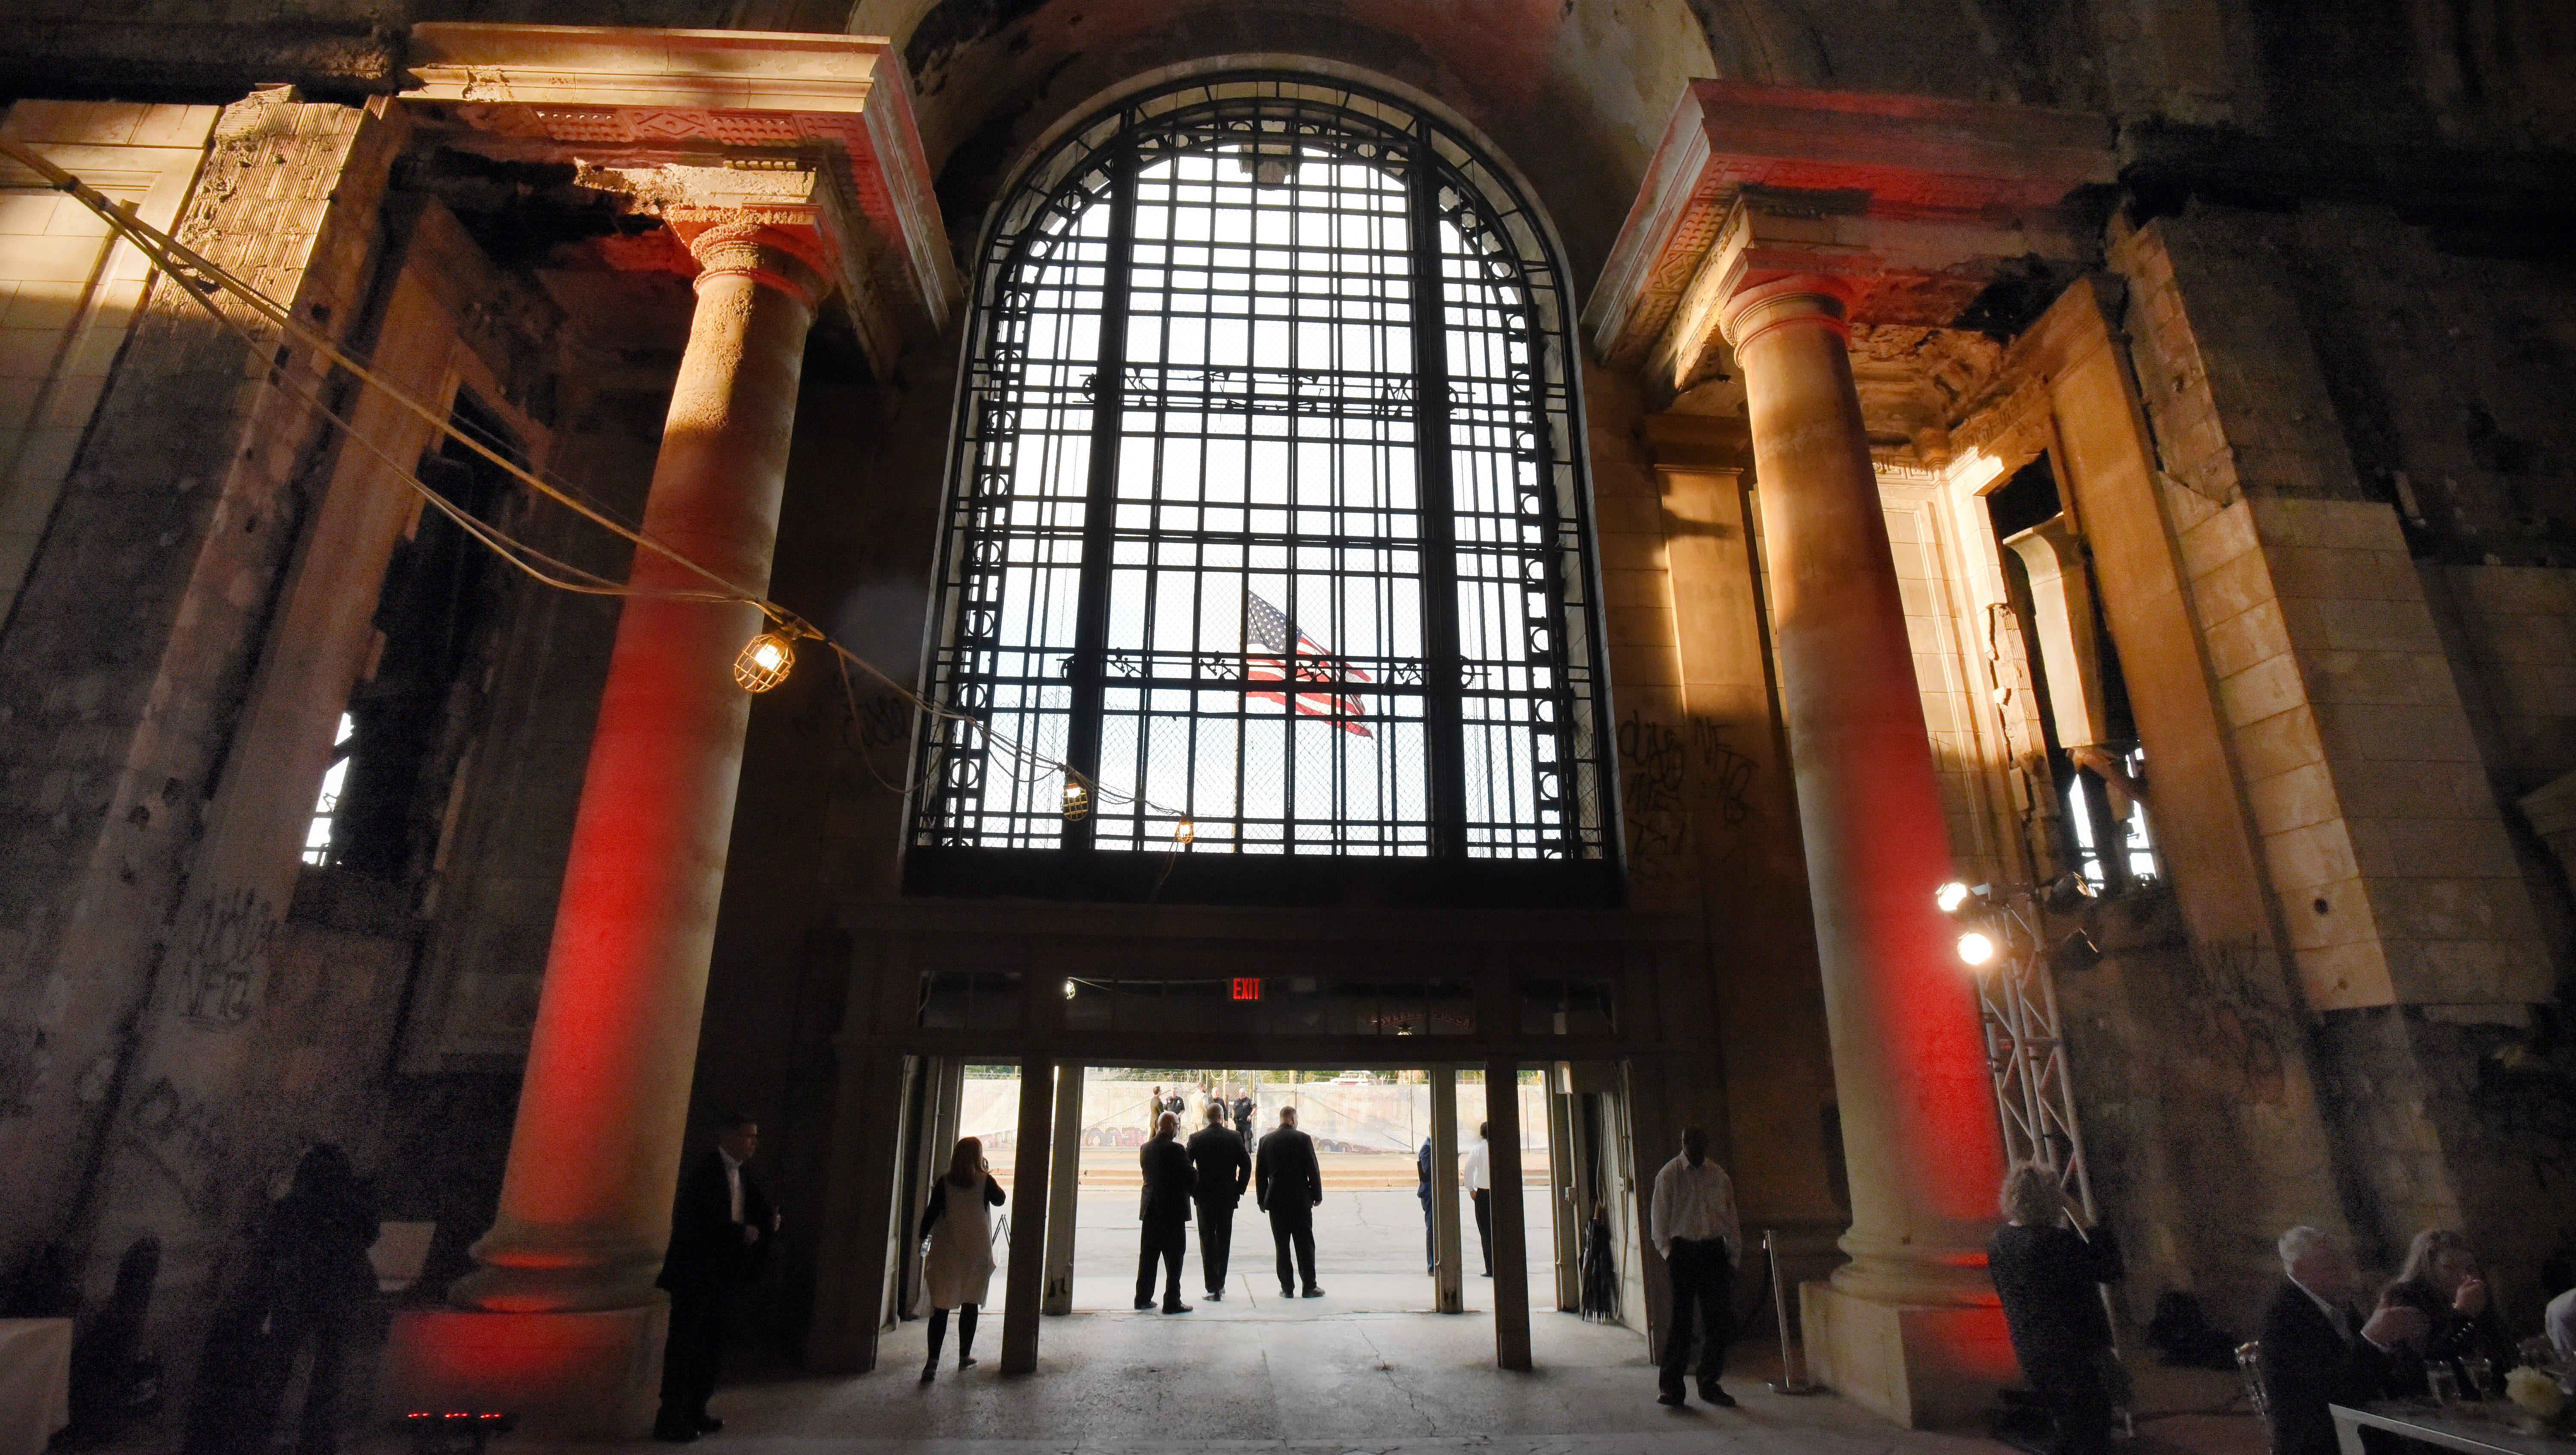 The American flag is seen through the front entrance during the Detroit Homecoming Ceremony at Michigan Central Depot in Detroit, Michigan back in September, 2017. (file photo)